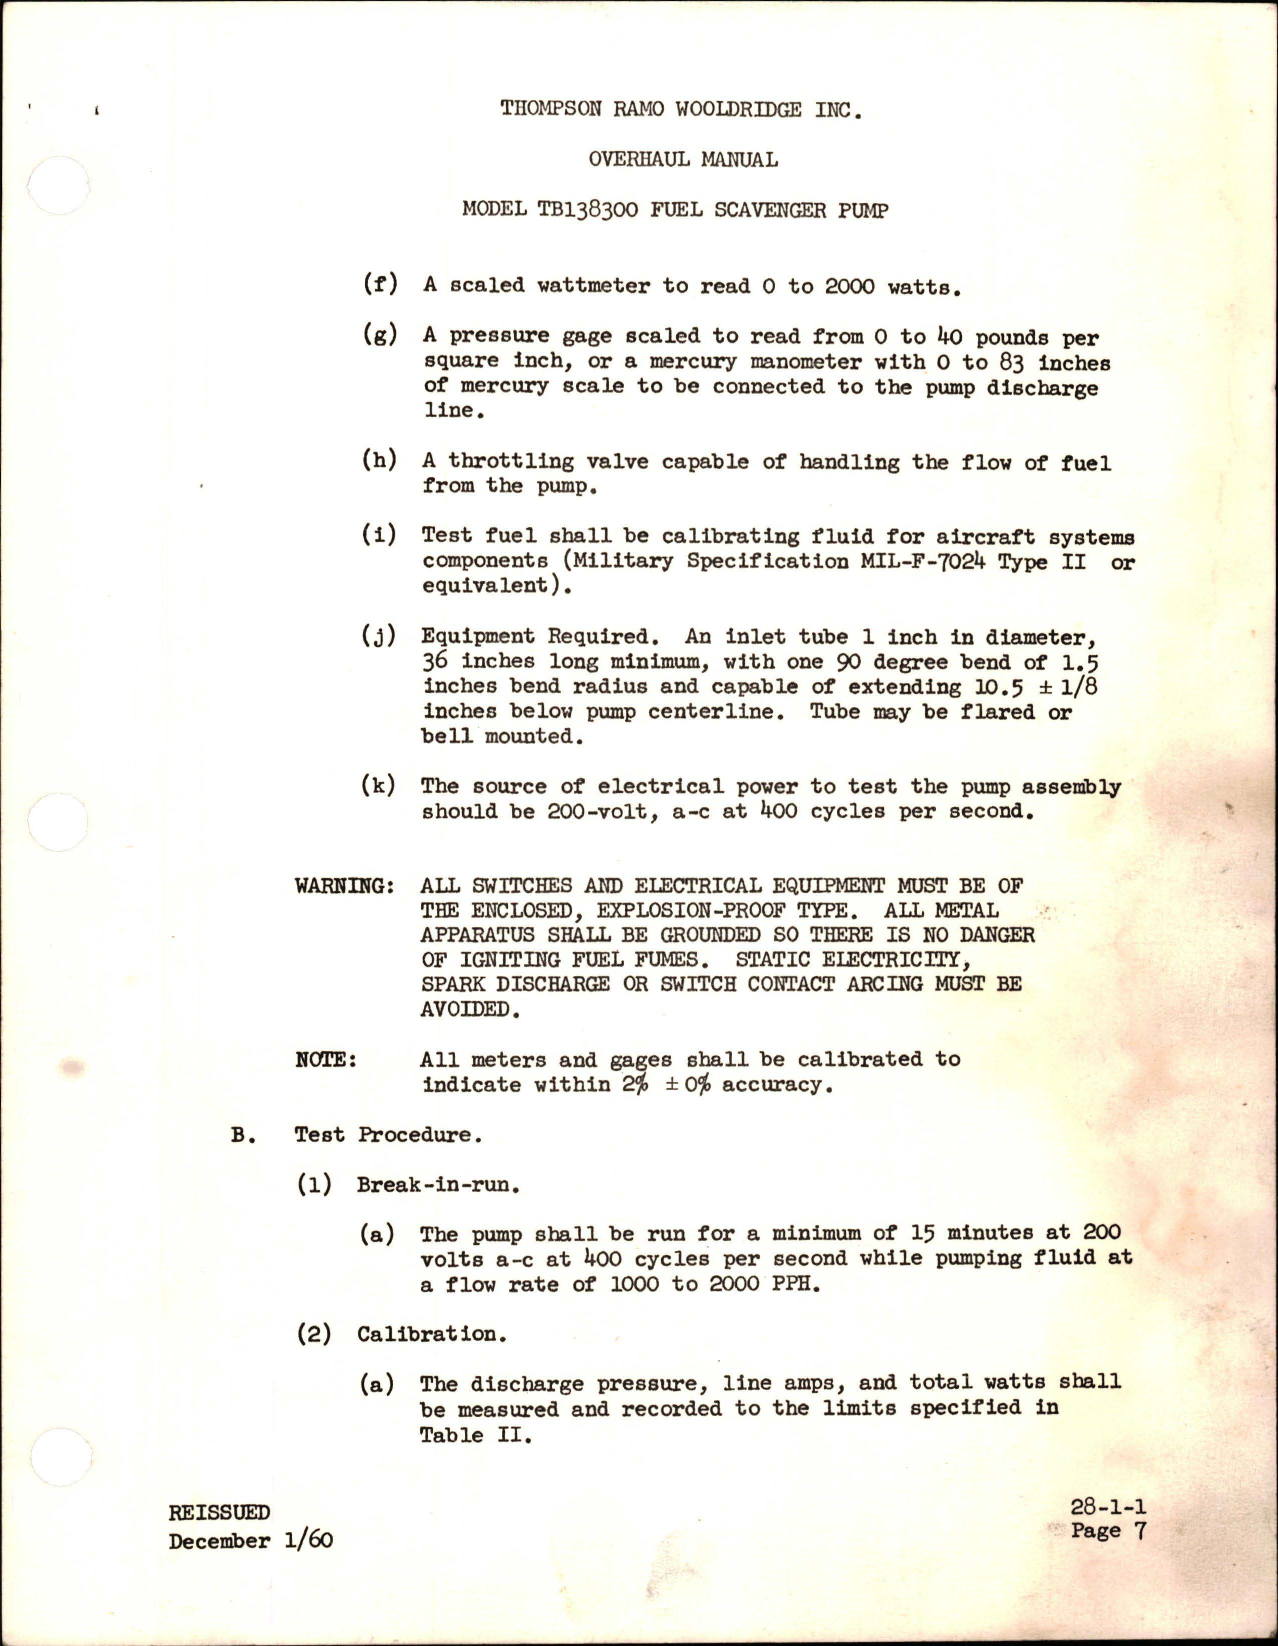 Sample page 7 from AirCorps Library document: Overhaul Manual for Fuel Scavenger Pump - Model TB138300